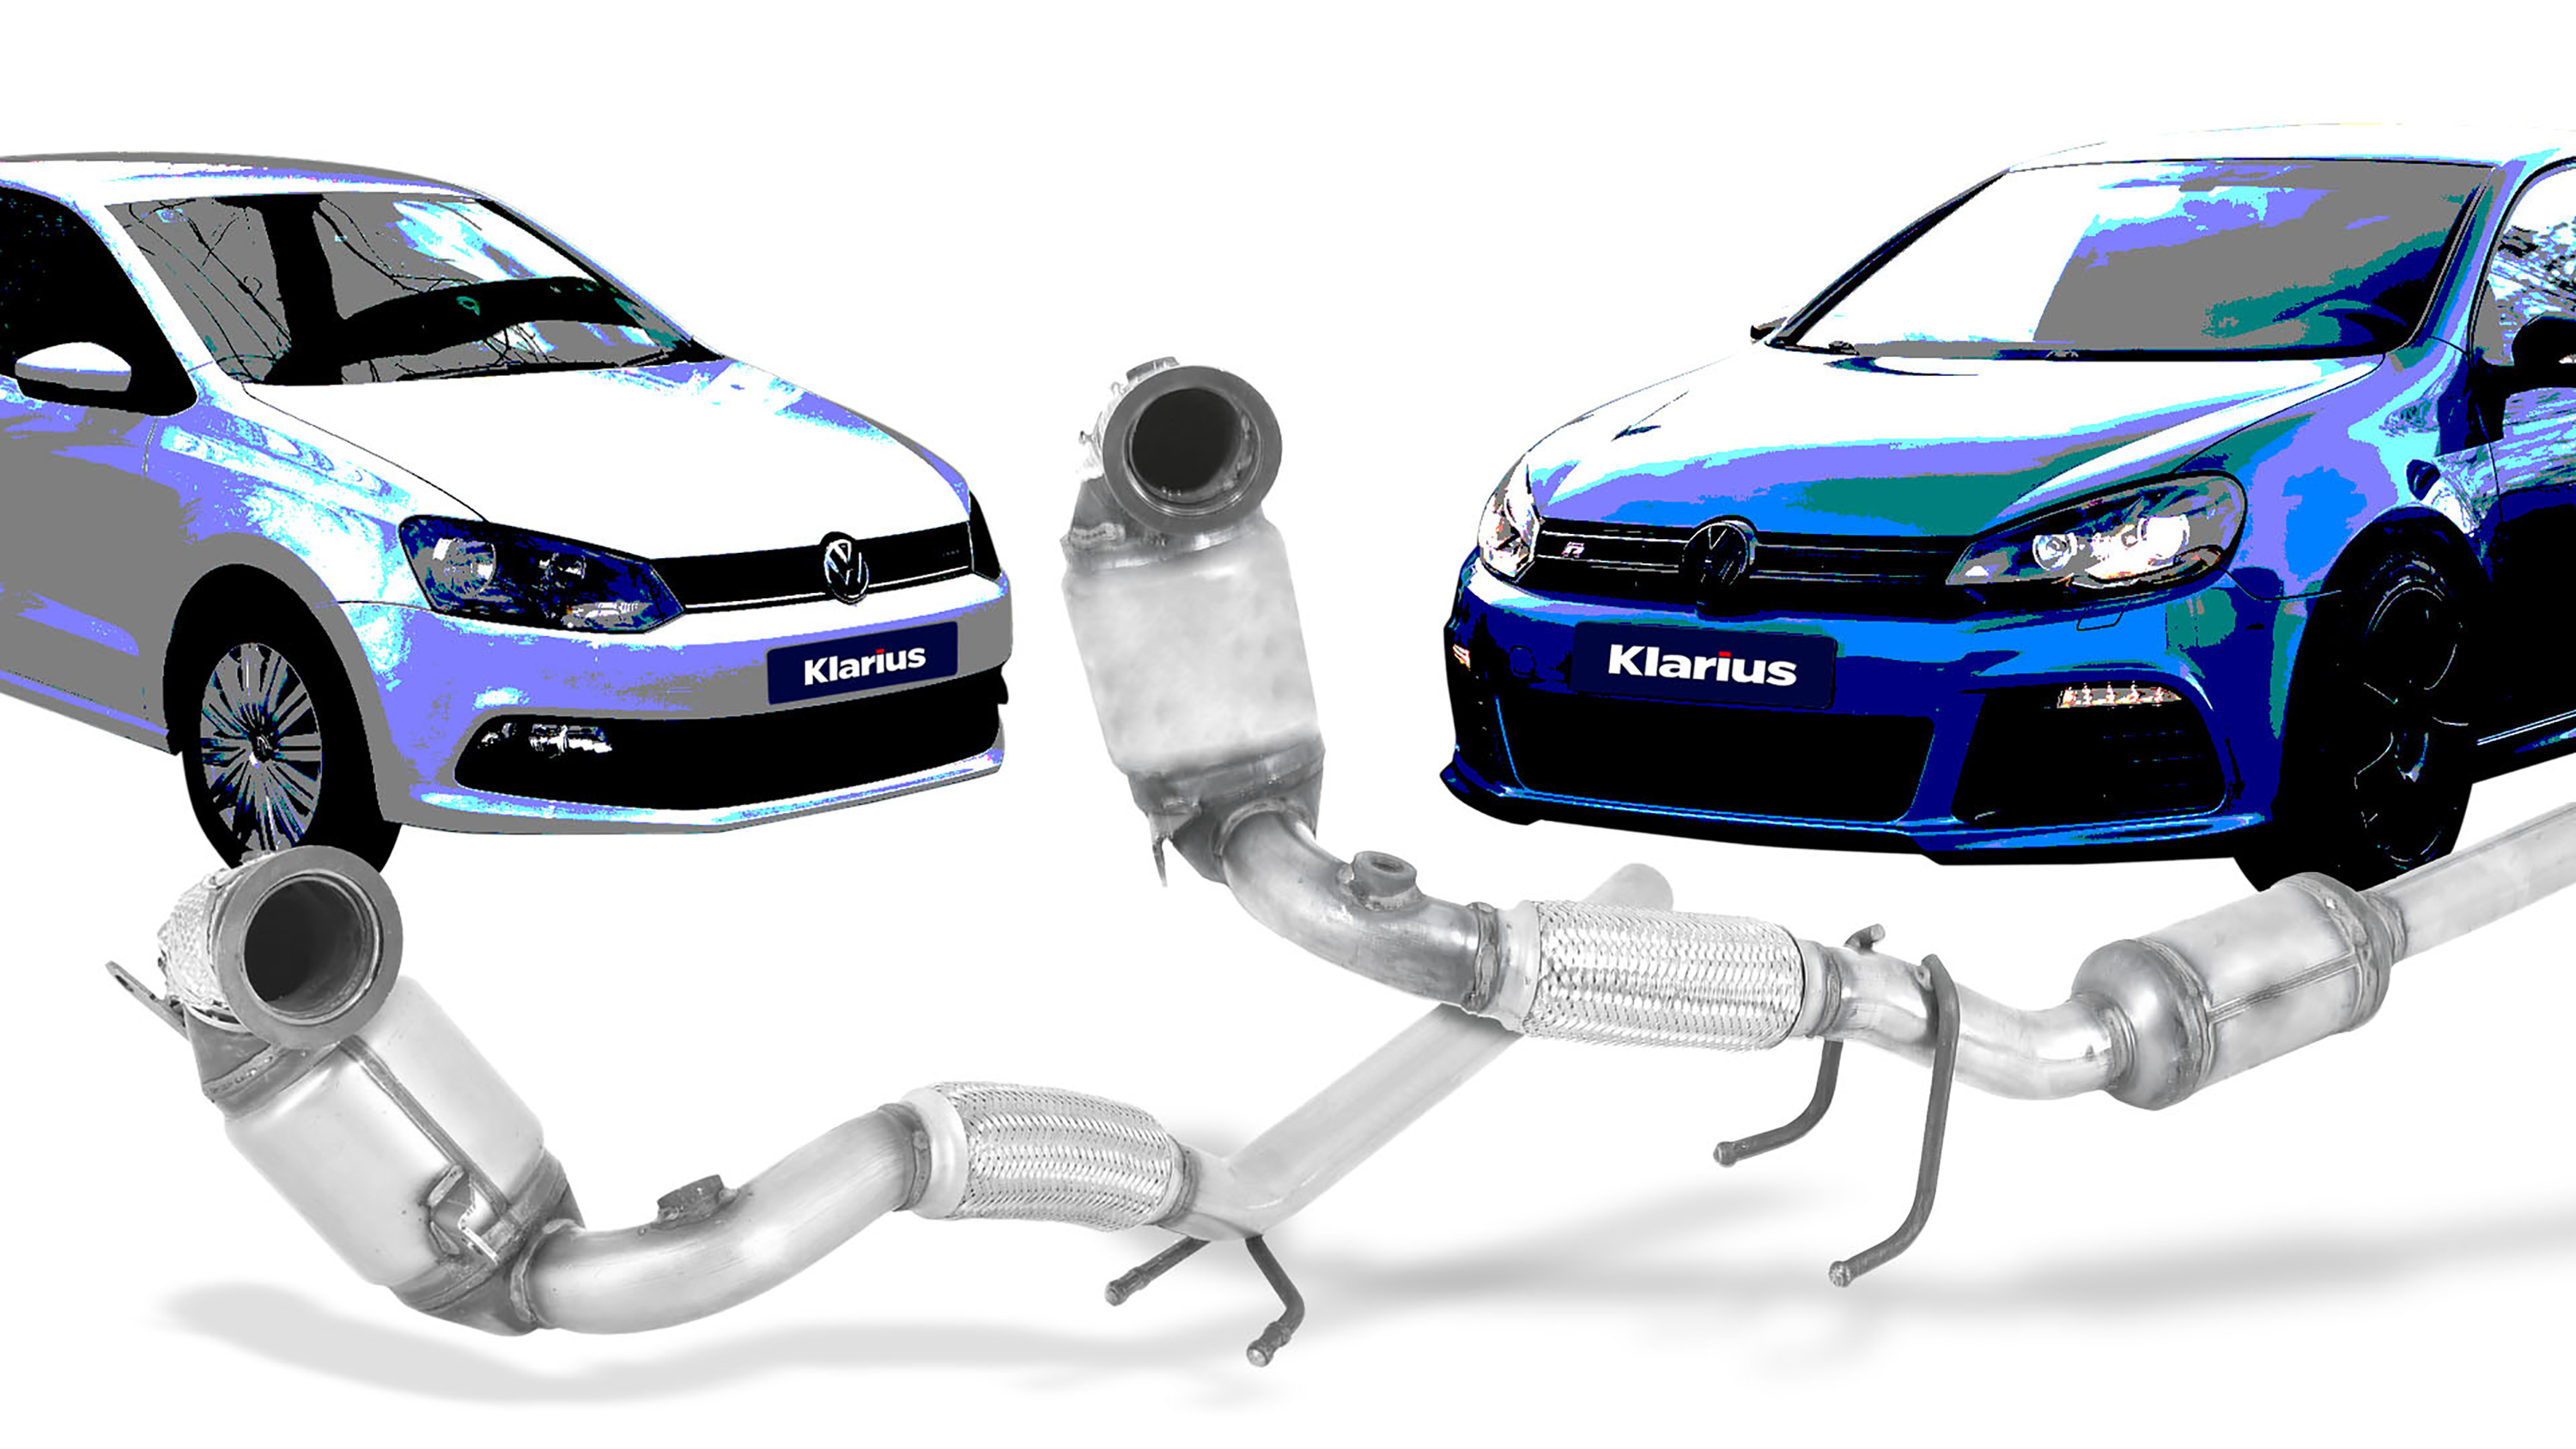 Klarius Products has added new catalytic converters (CATs) for the latest models of the Volkswagen Golf and Polo 1.2